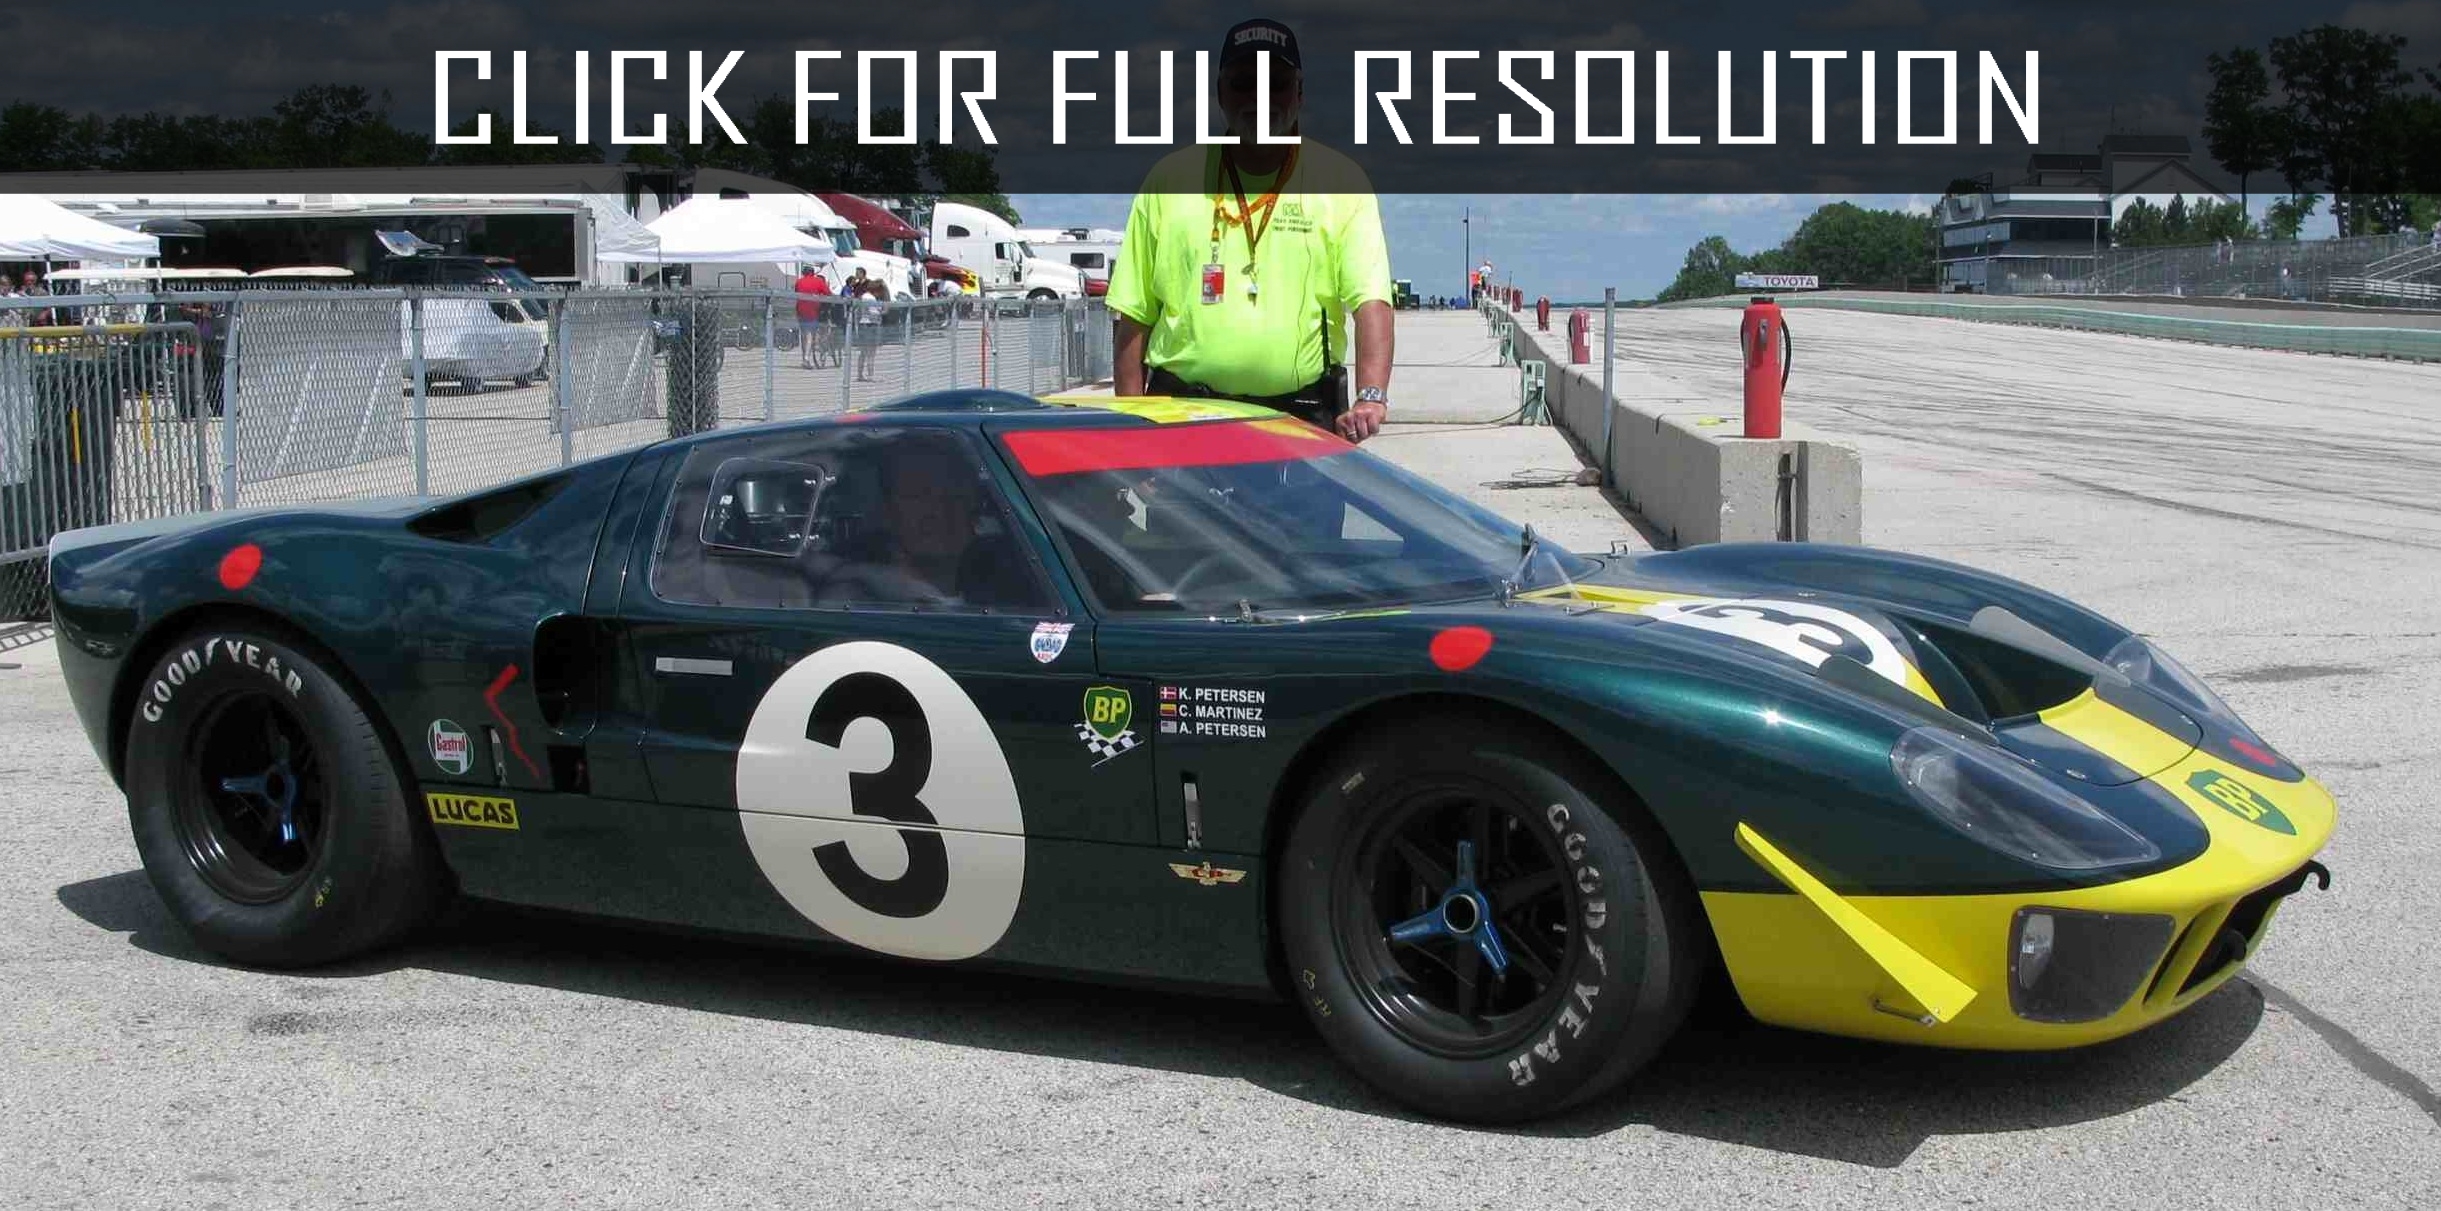 2005 Ford Gt40